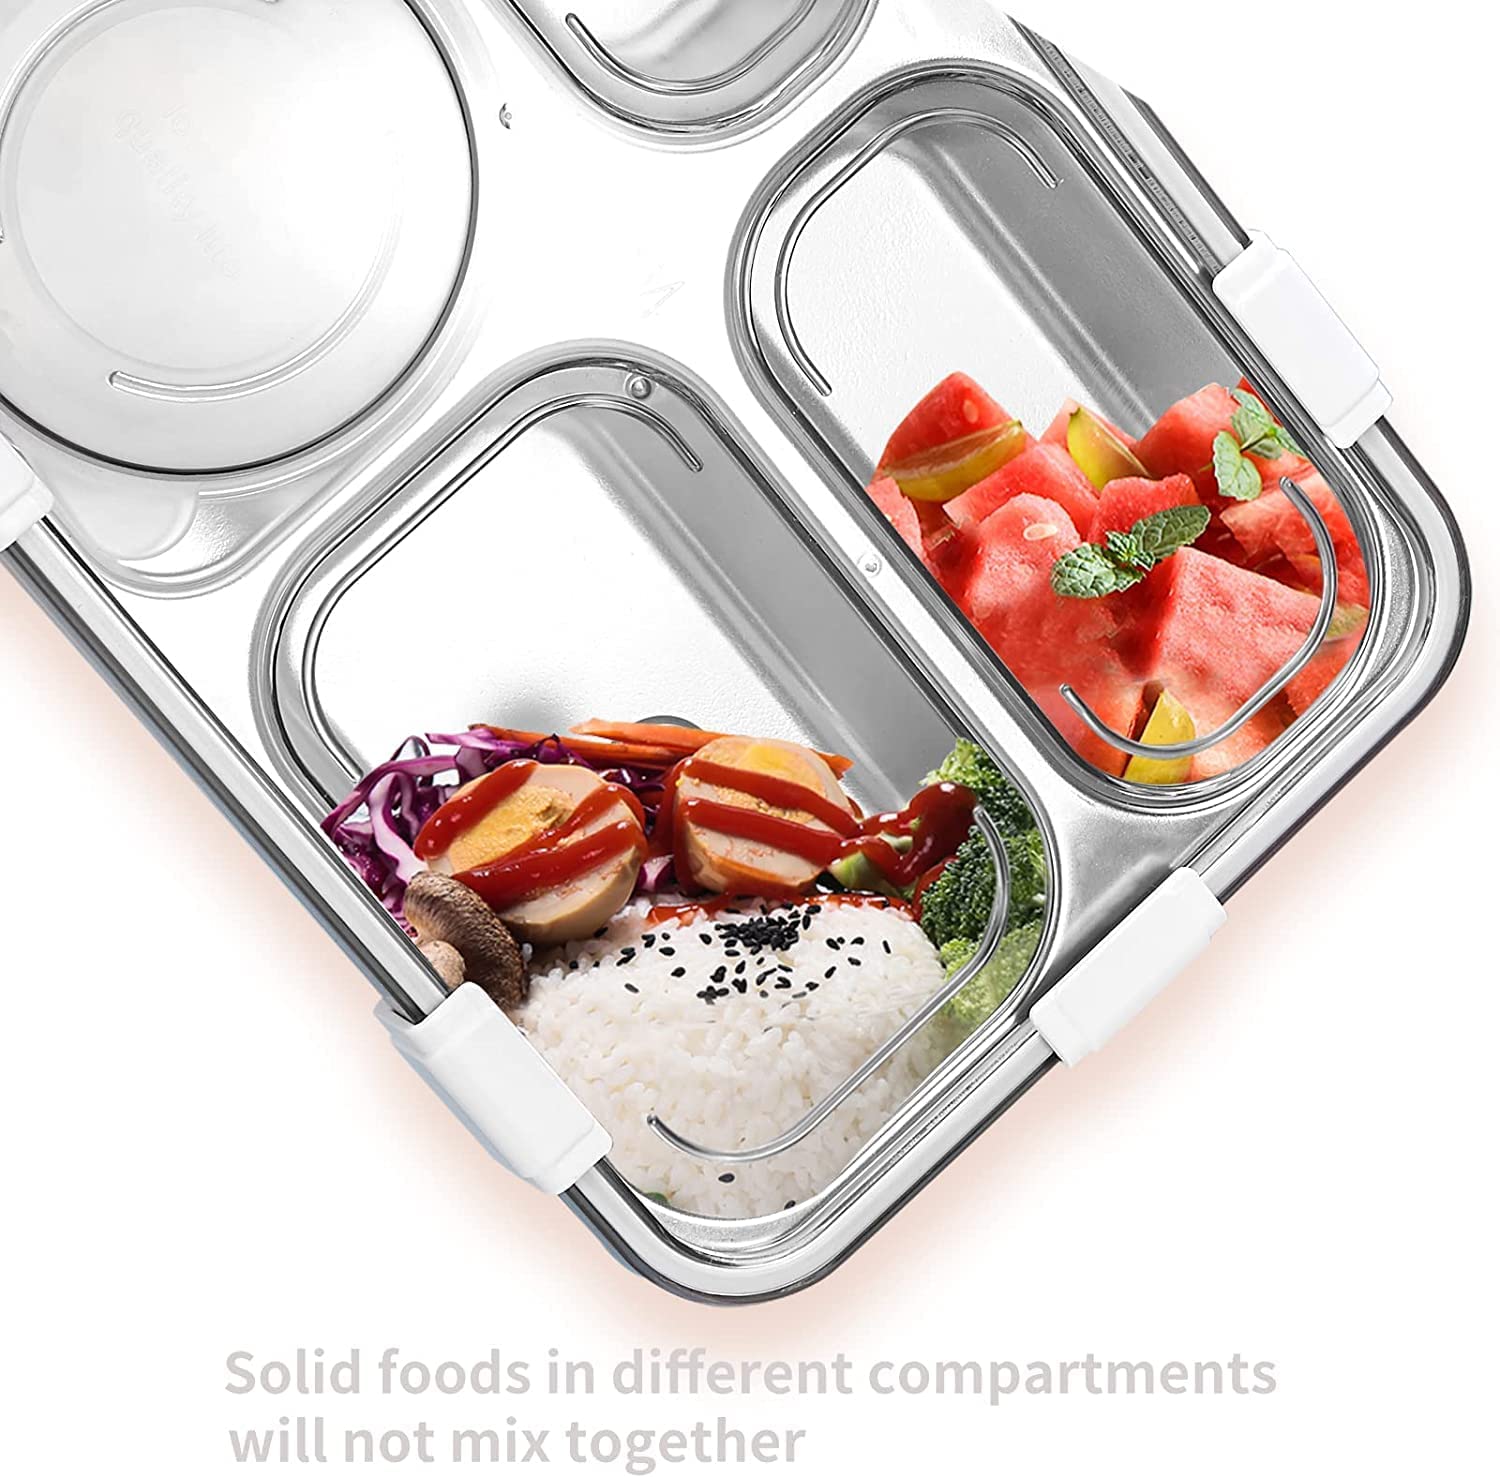 Upgrade Your Lunch Routine with Our Multi-Compartment Lunch Boxes - Perfect for Adults and Kids!